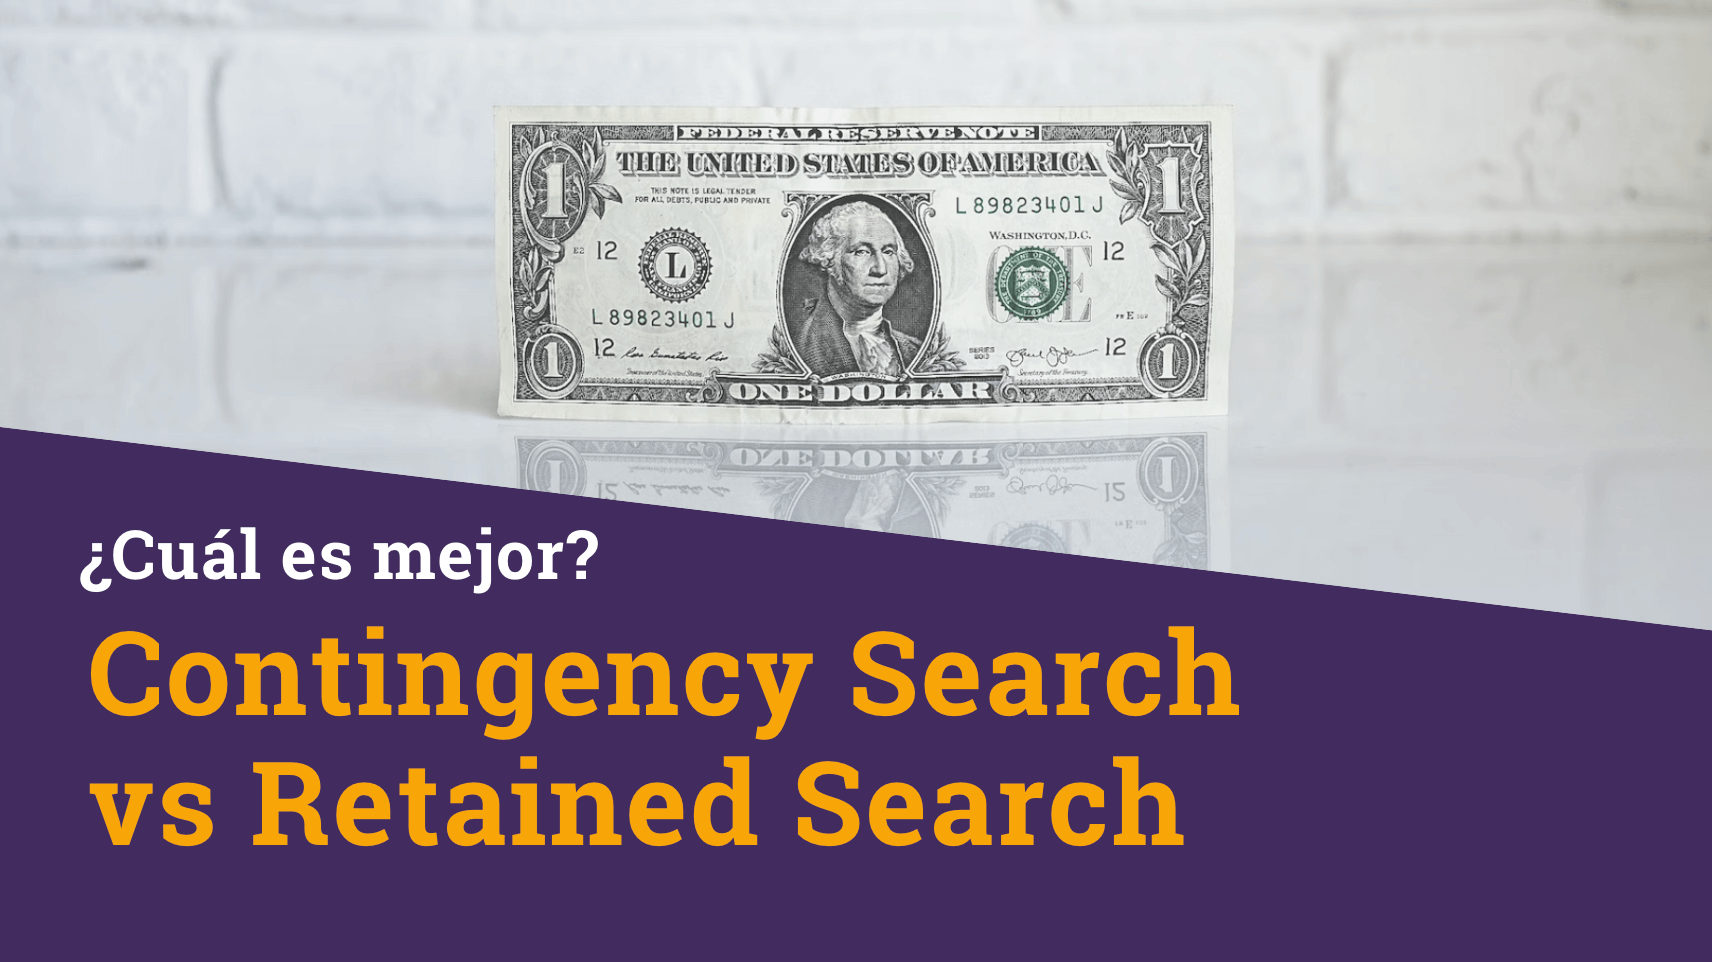 Contingency Search vs Retained Search ¿Cuál es mejor?